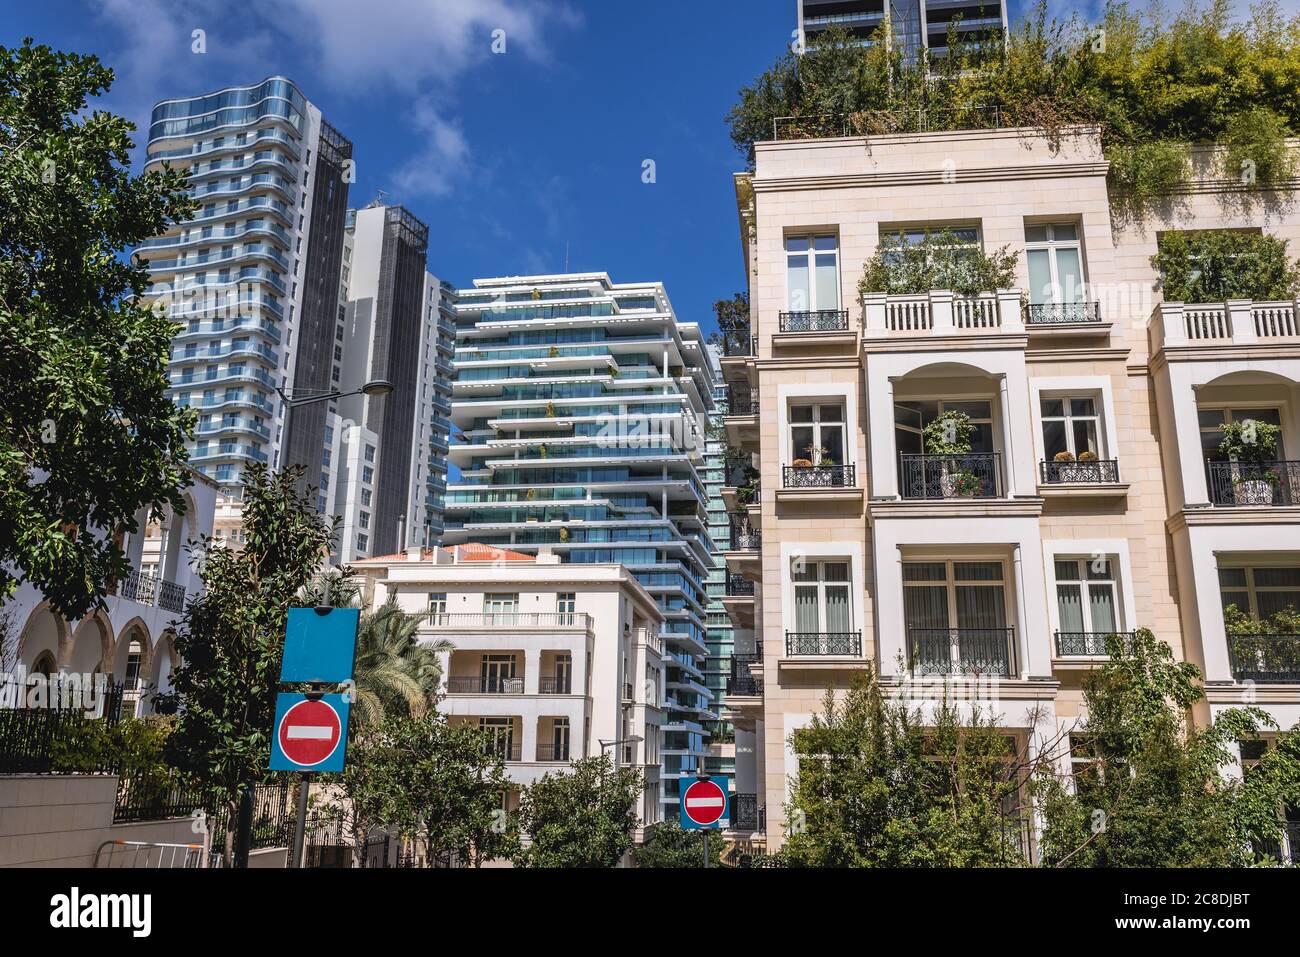 Noor Gardens Block Of Flats And Beirut Terraces Modern Residential Building In Beirut Lebanon Stock Photo Alamy